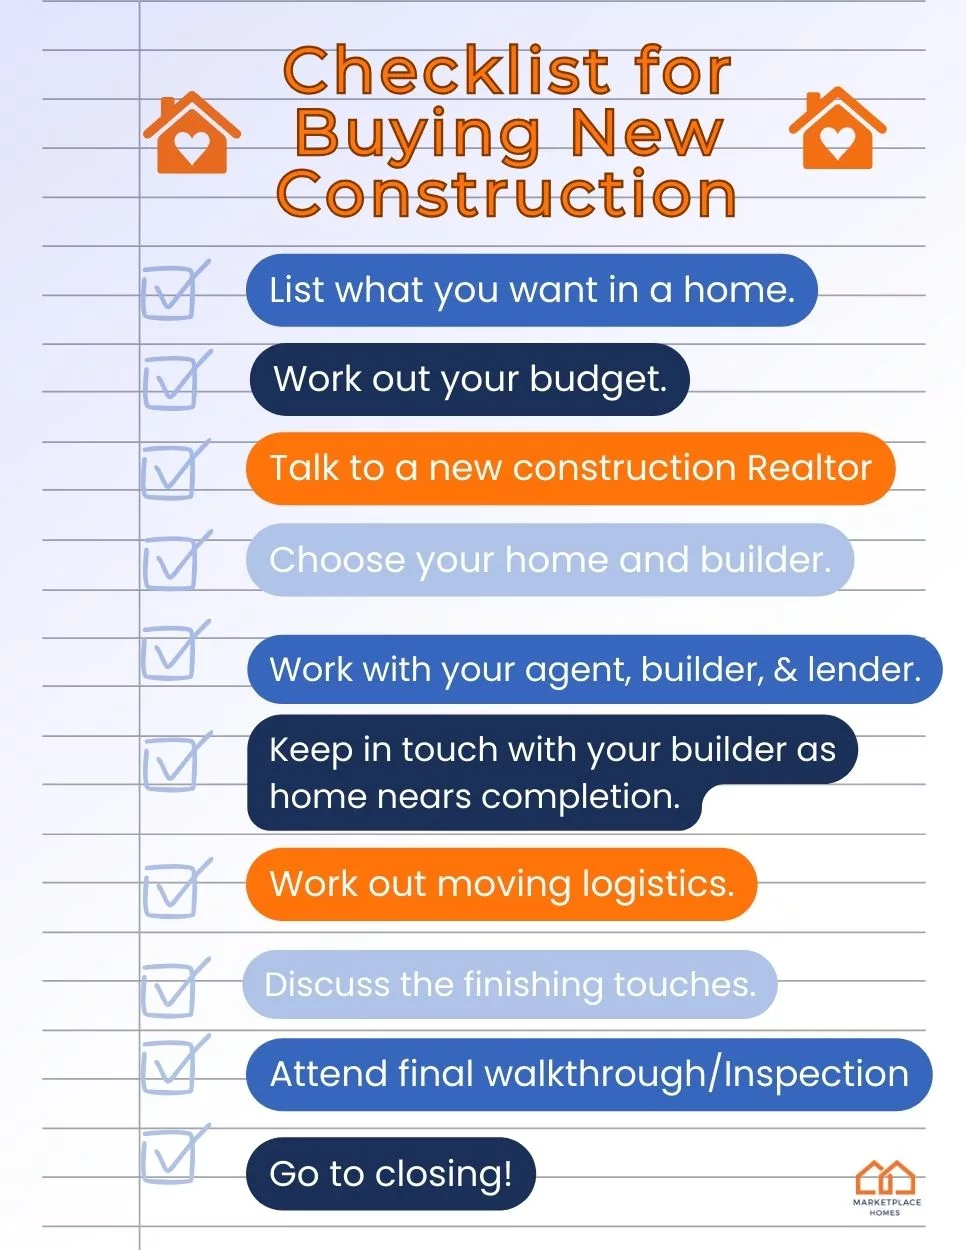 checklist for buying new construction